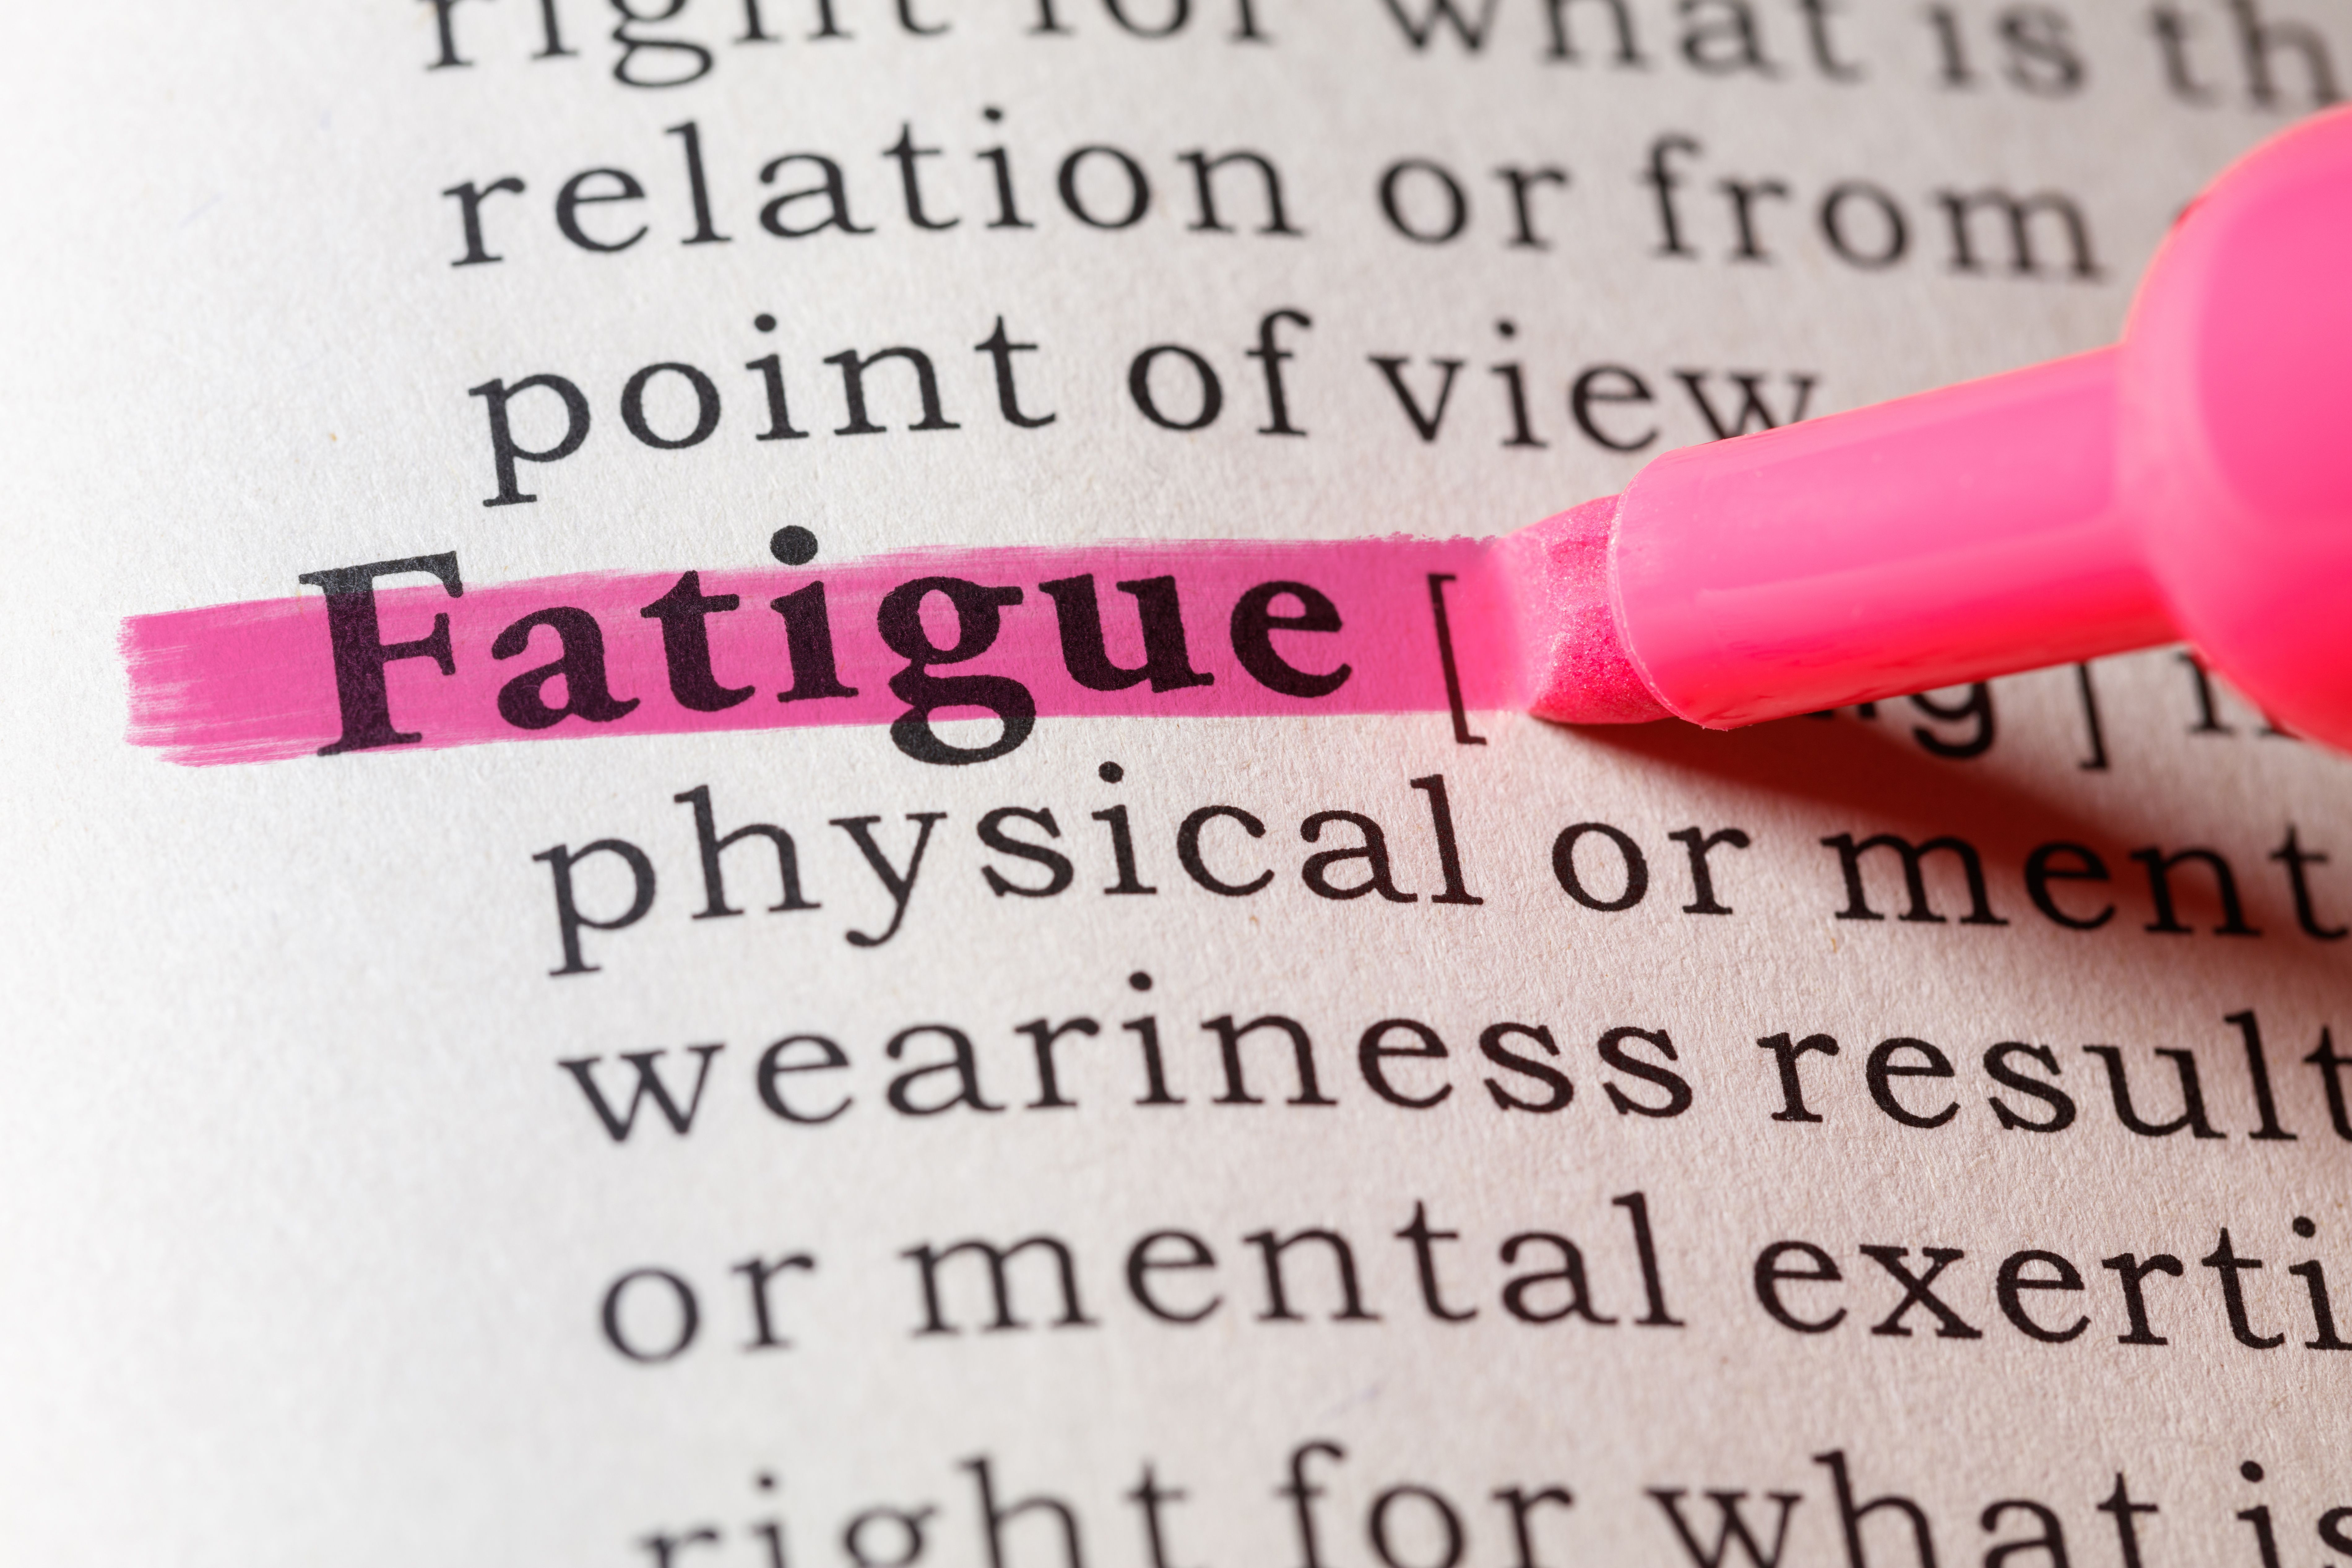 Fatigue is one of the most prevalent non-painful symptoms reported in SCD | image credit: Feng Yu - stock.adobe.com